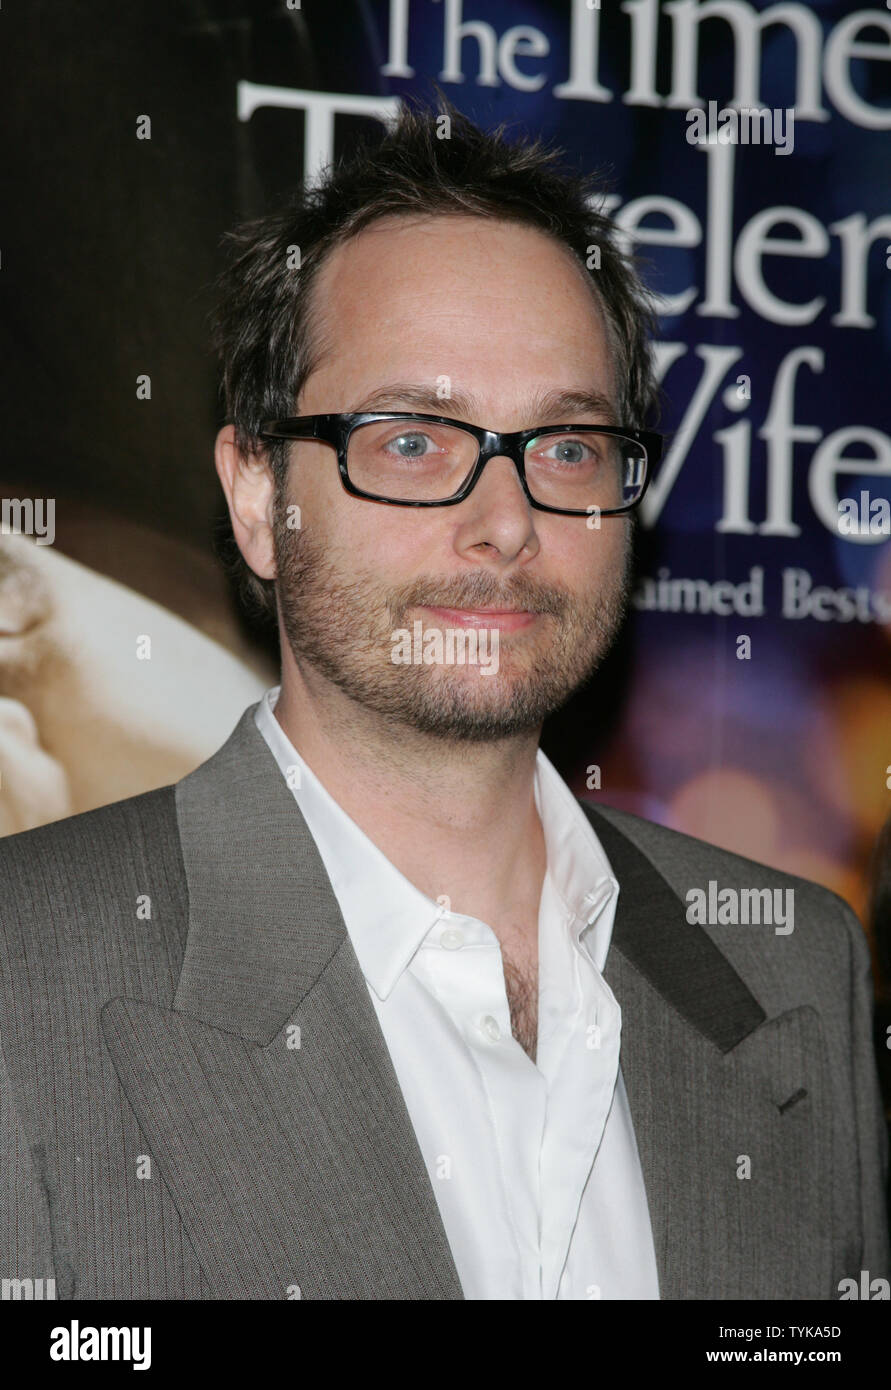 Director Robert Schwentke arrives for the premiere of 'The Time Traveler's Wife' at the Ziegfeld Theatre in New York on August 12, 2009.       UPI Photo/Laura Cavanaugh Stock Photo